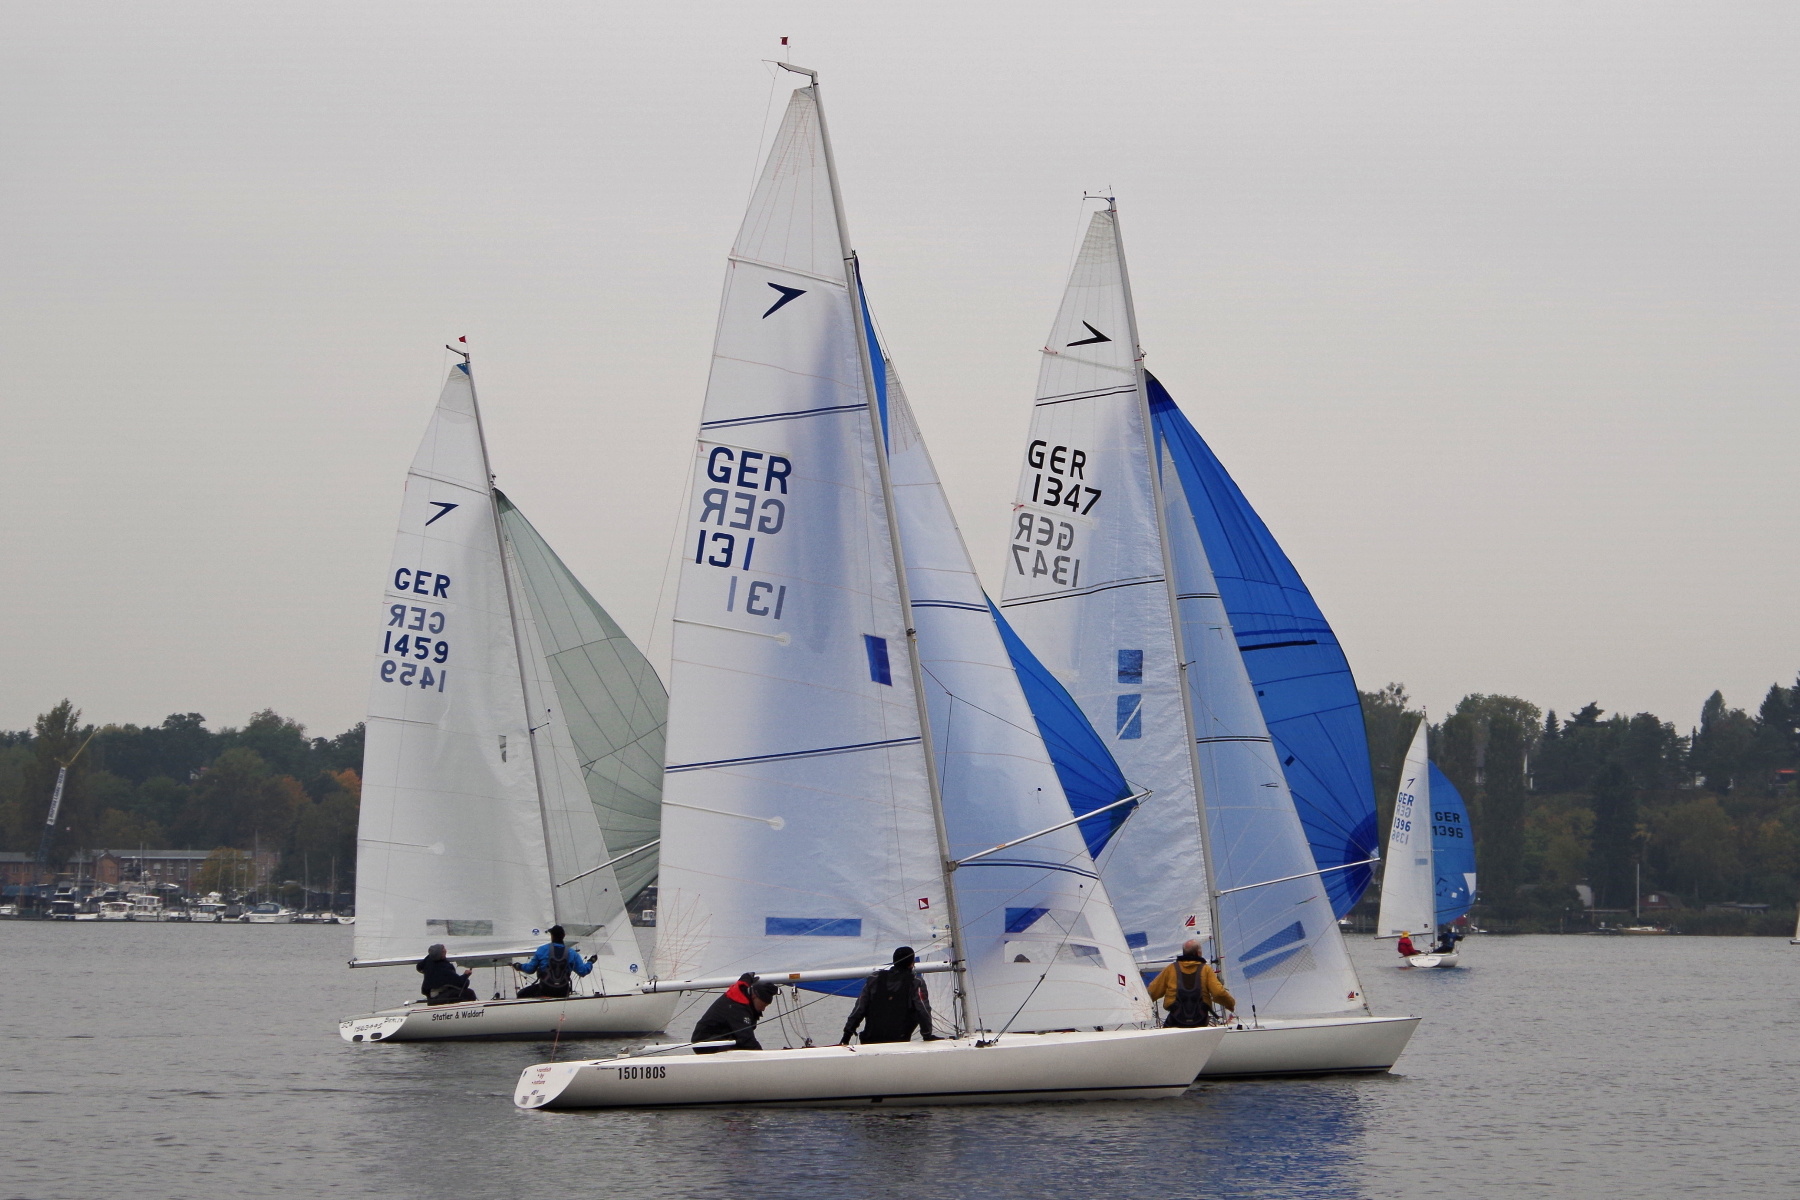  J/70, Dyas  May Opening  Tutzing GER  Final results